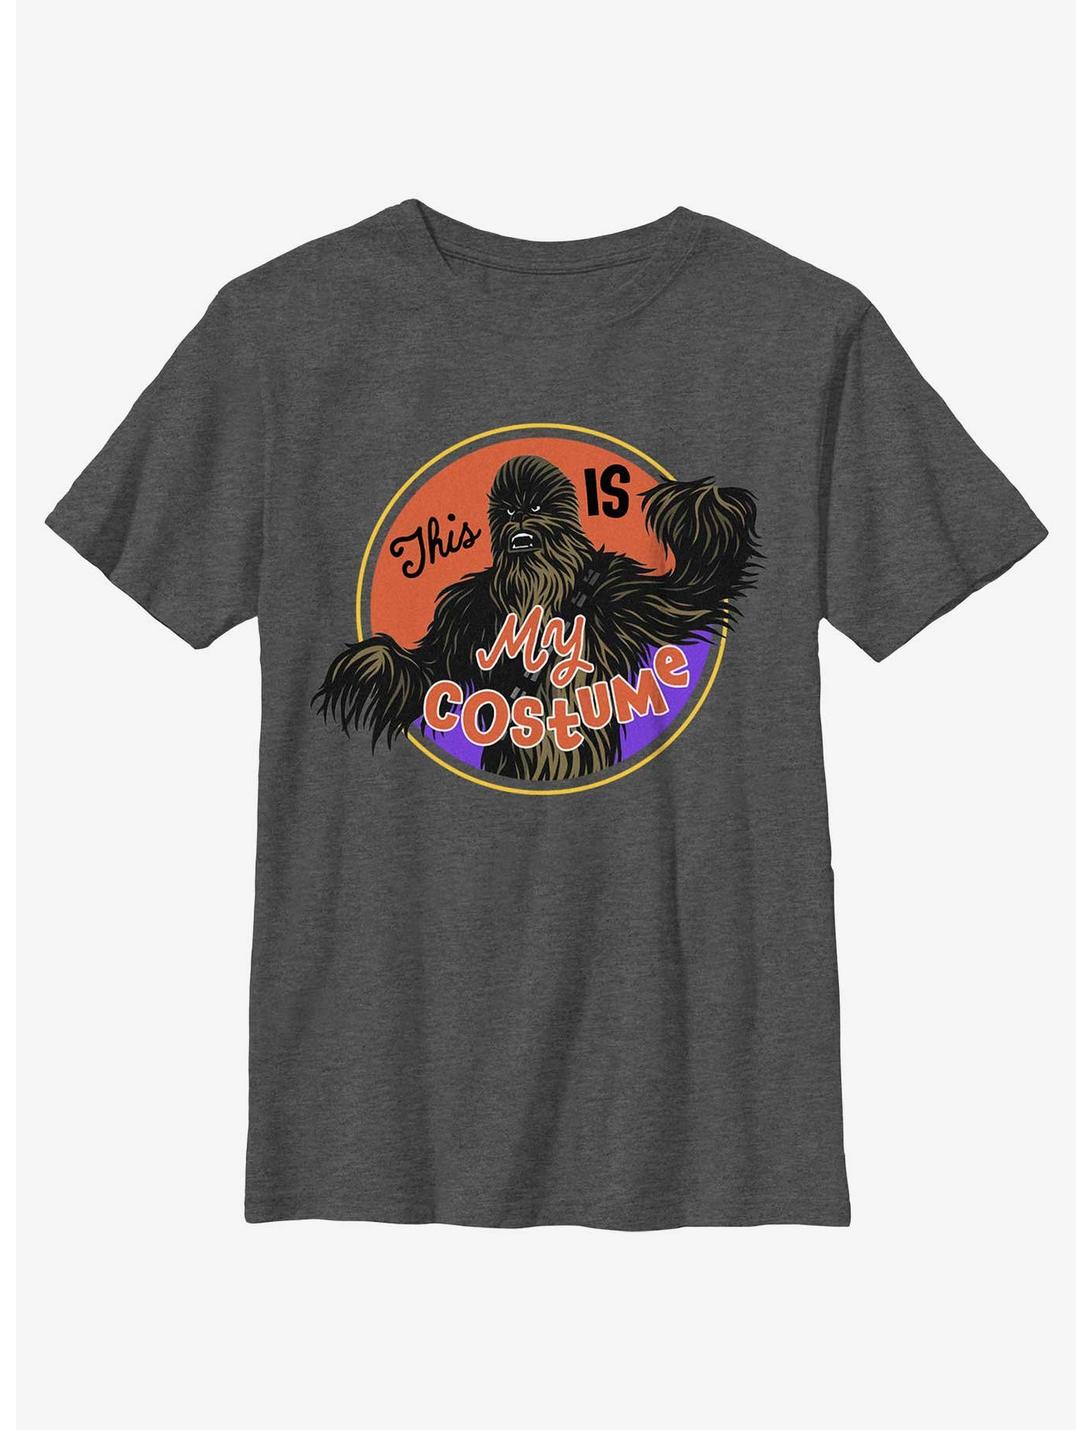 Star Wars My Wookie Costume Youth T-Shirt, CHAR HTR, hi-res